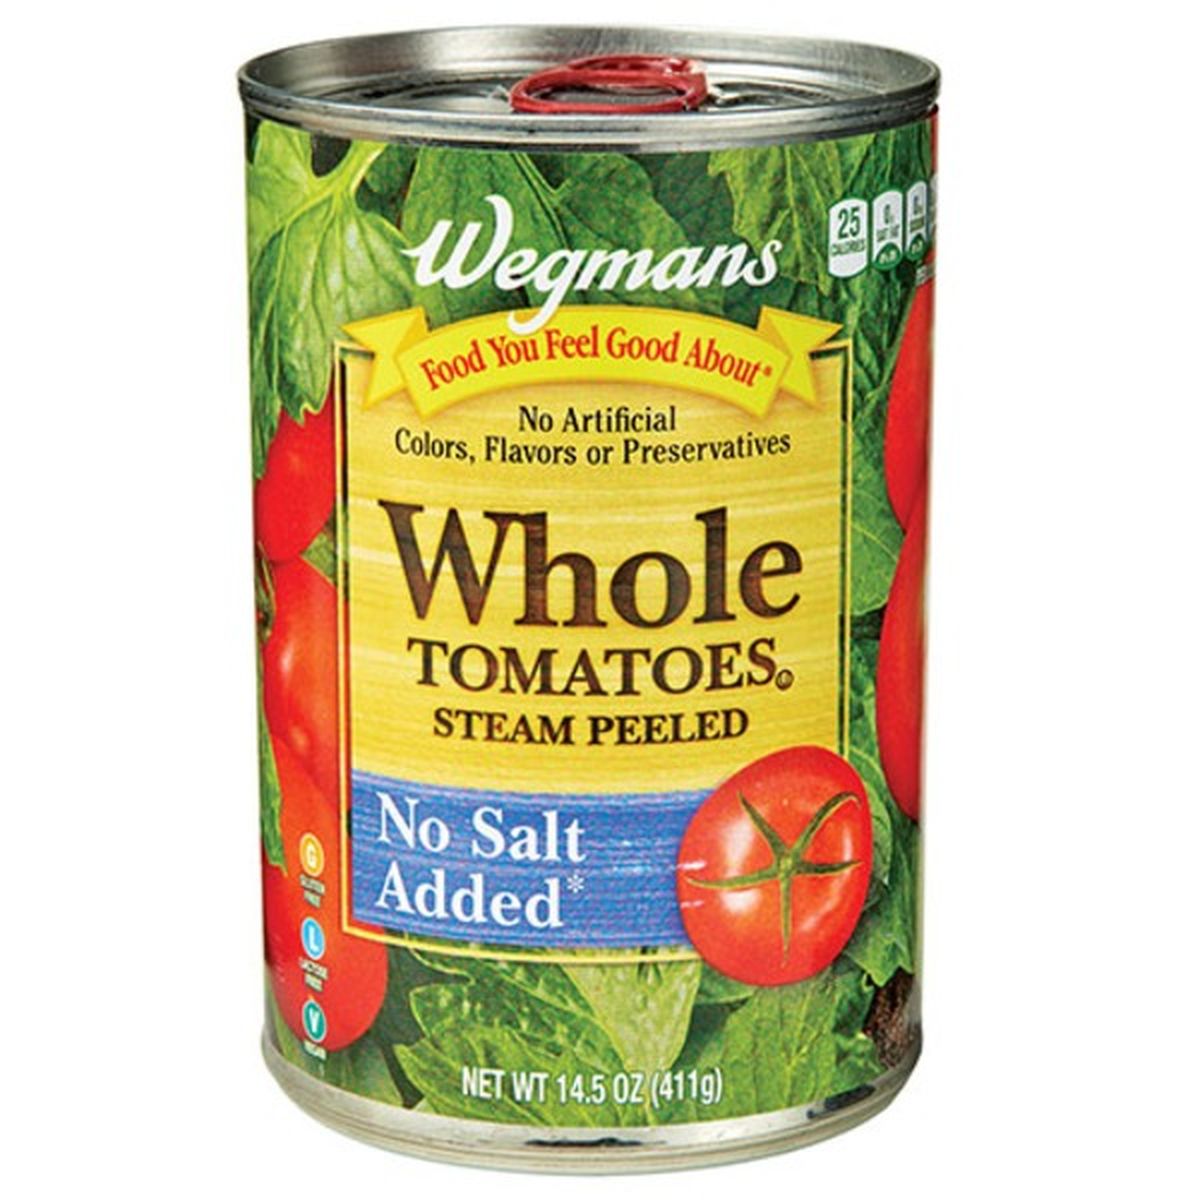 Calories in Wegmans Whole No Salt Added Tomatoes